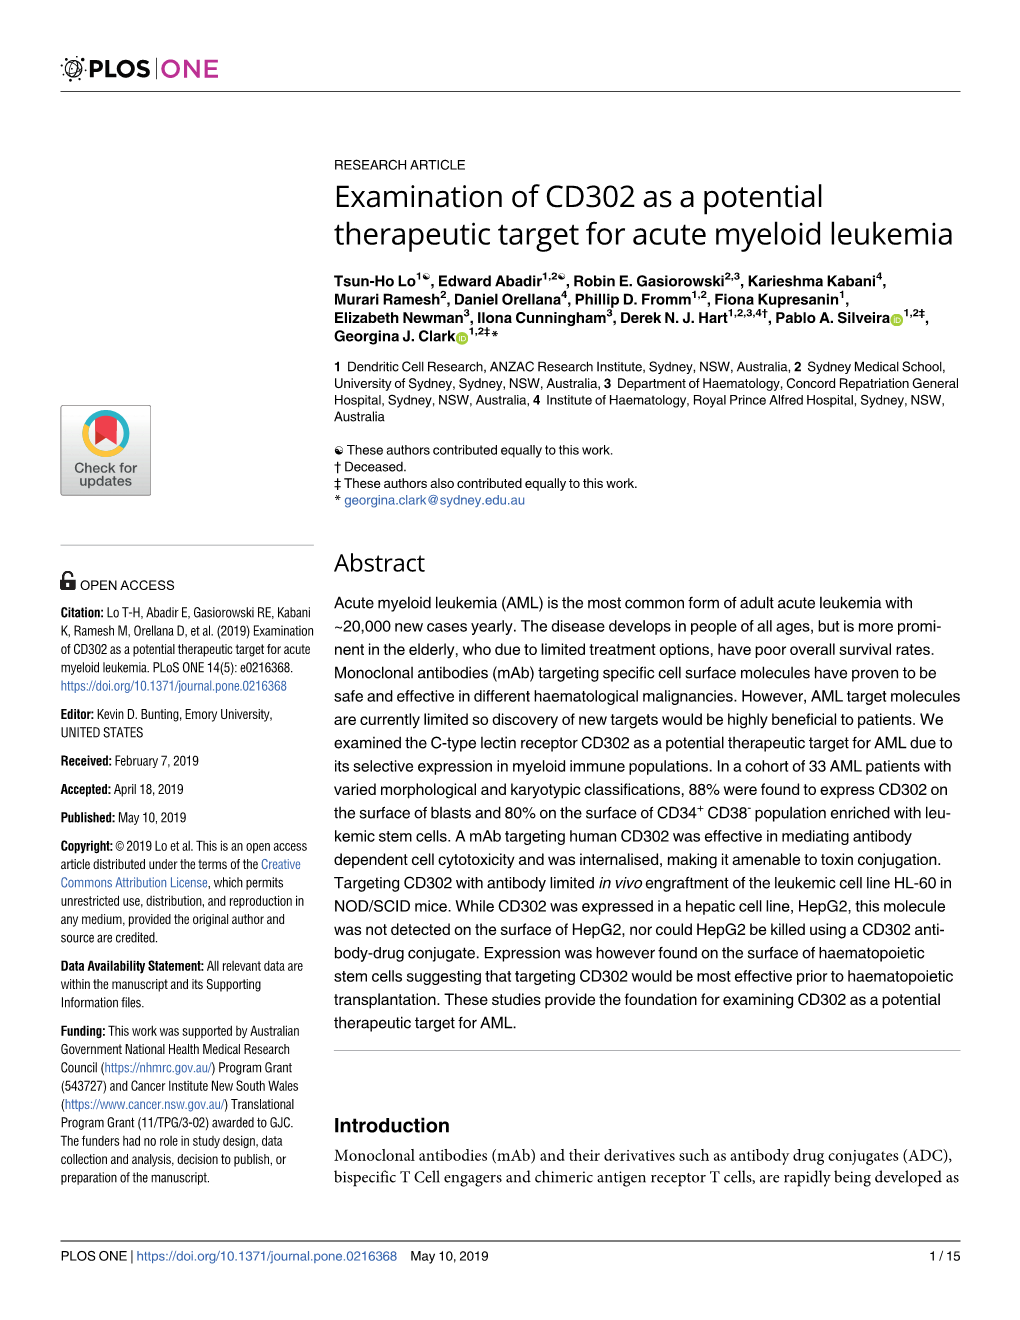 Examination of CD302 As a Potential Therapeutic Target for Acute Myeloid Leukemia